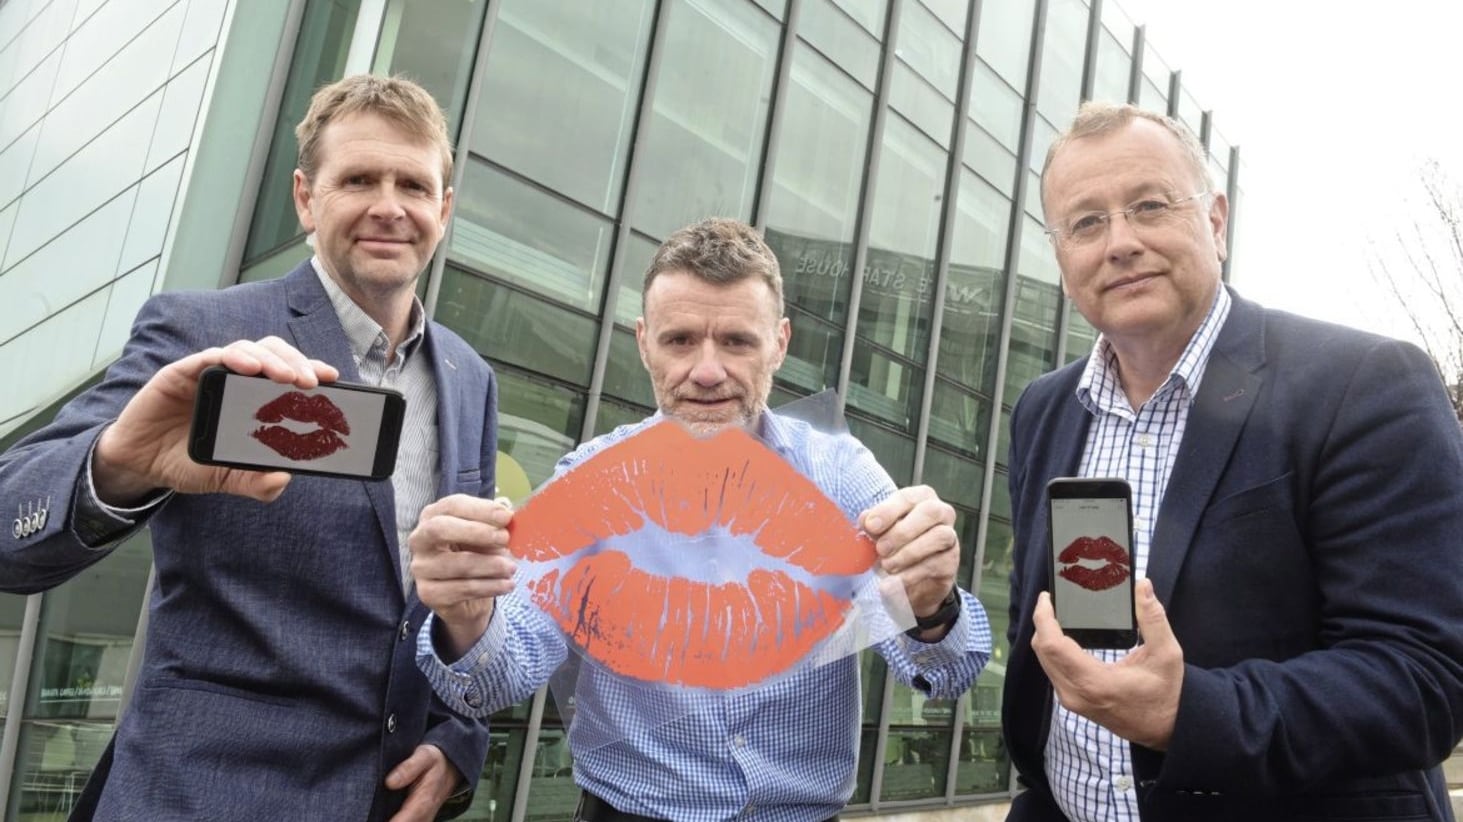 Liopa founders Richard McConnell and Liam McQuillan with Hal Wilson, partner at funder Techstart NI.